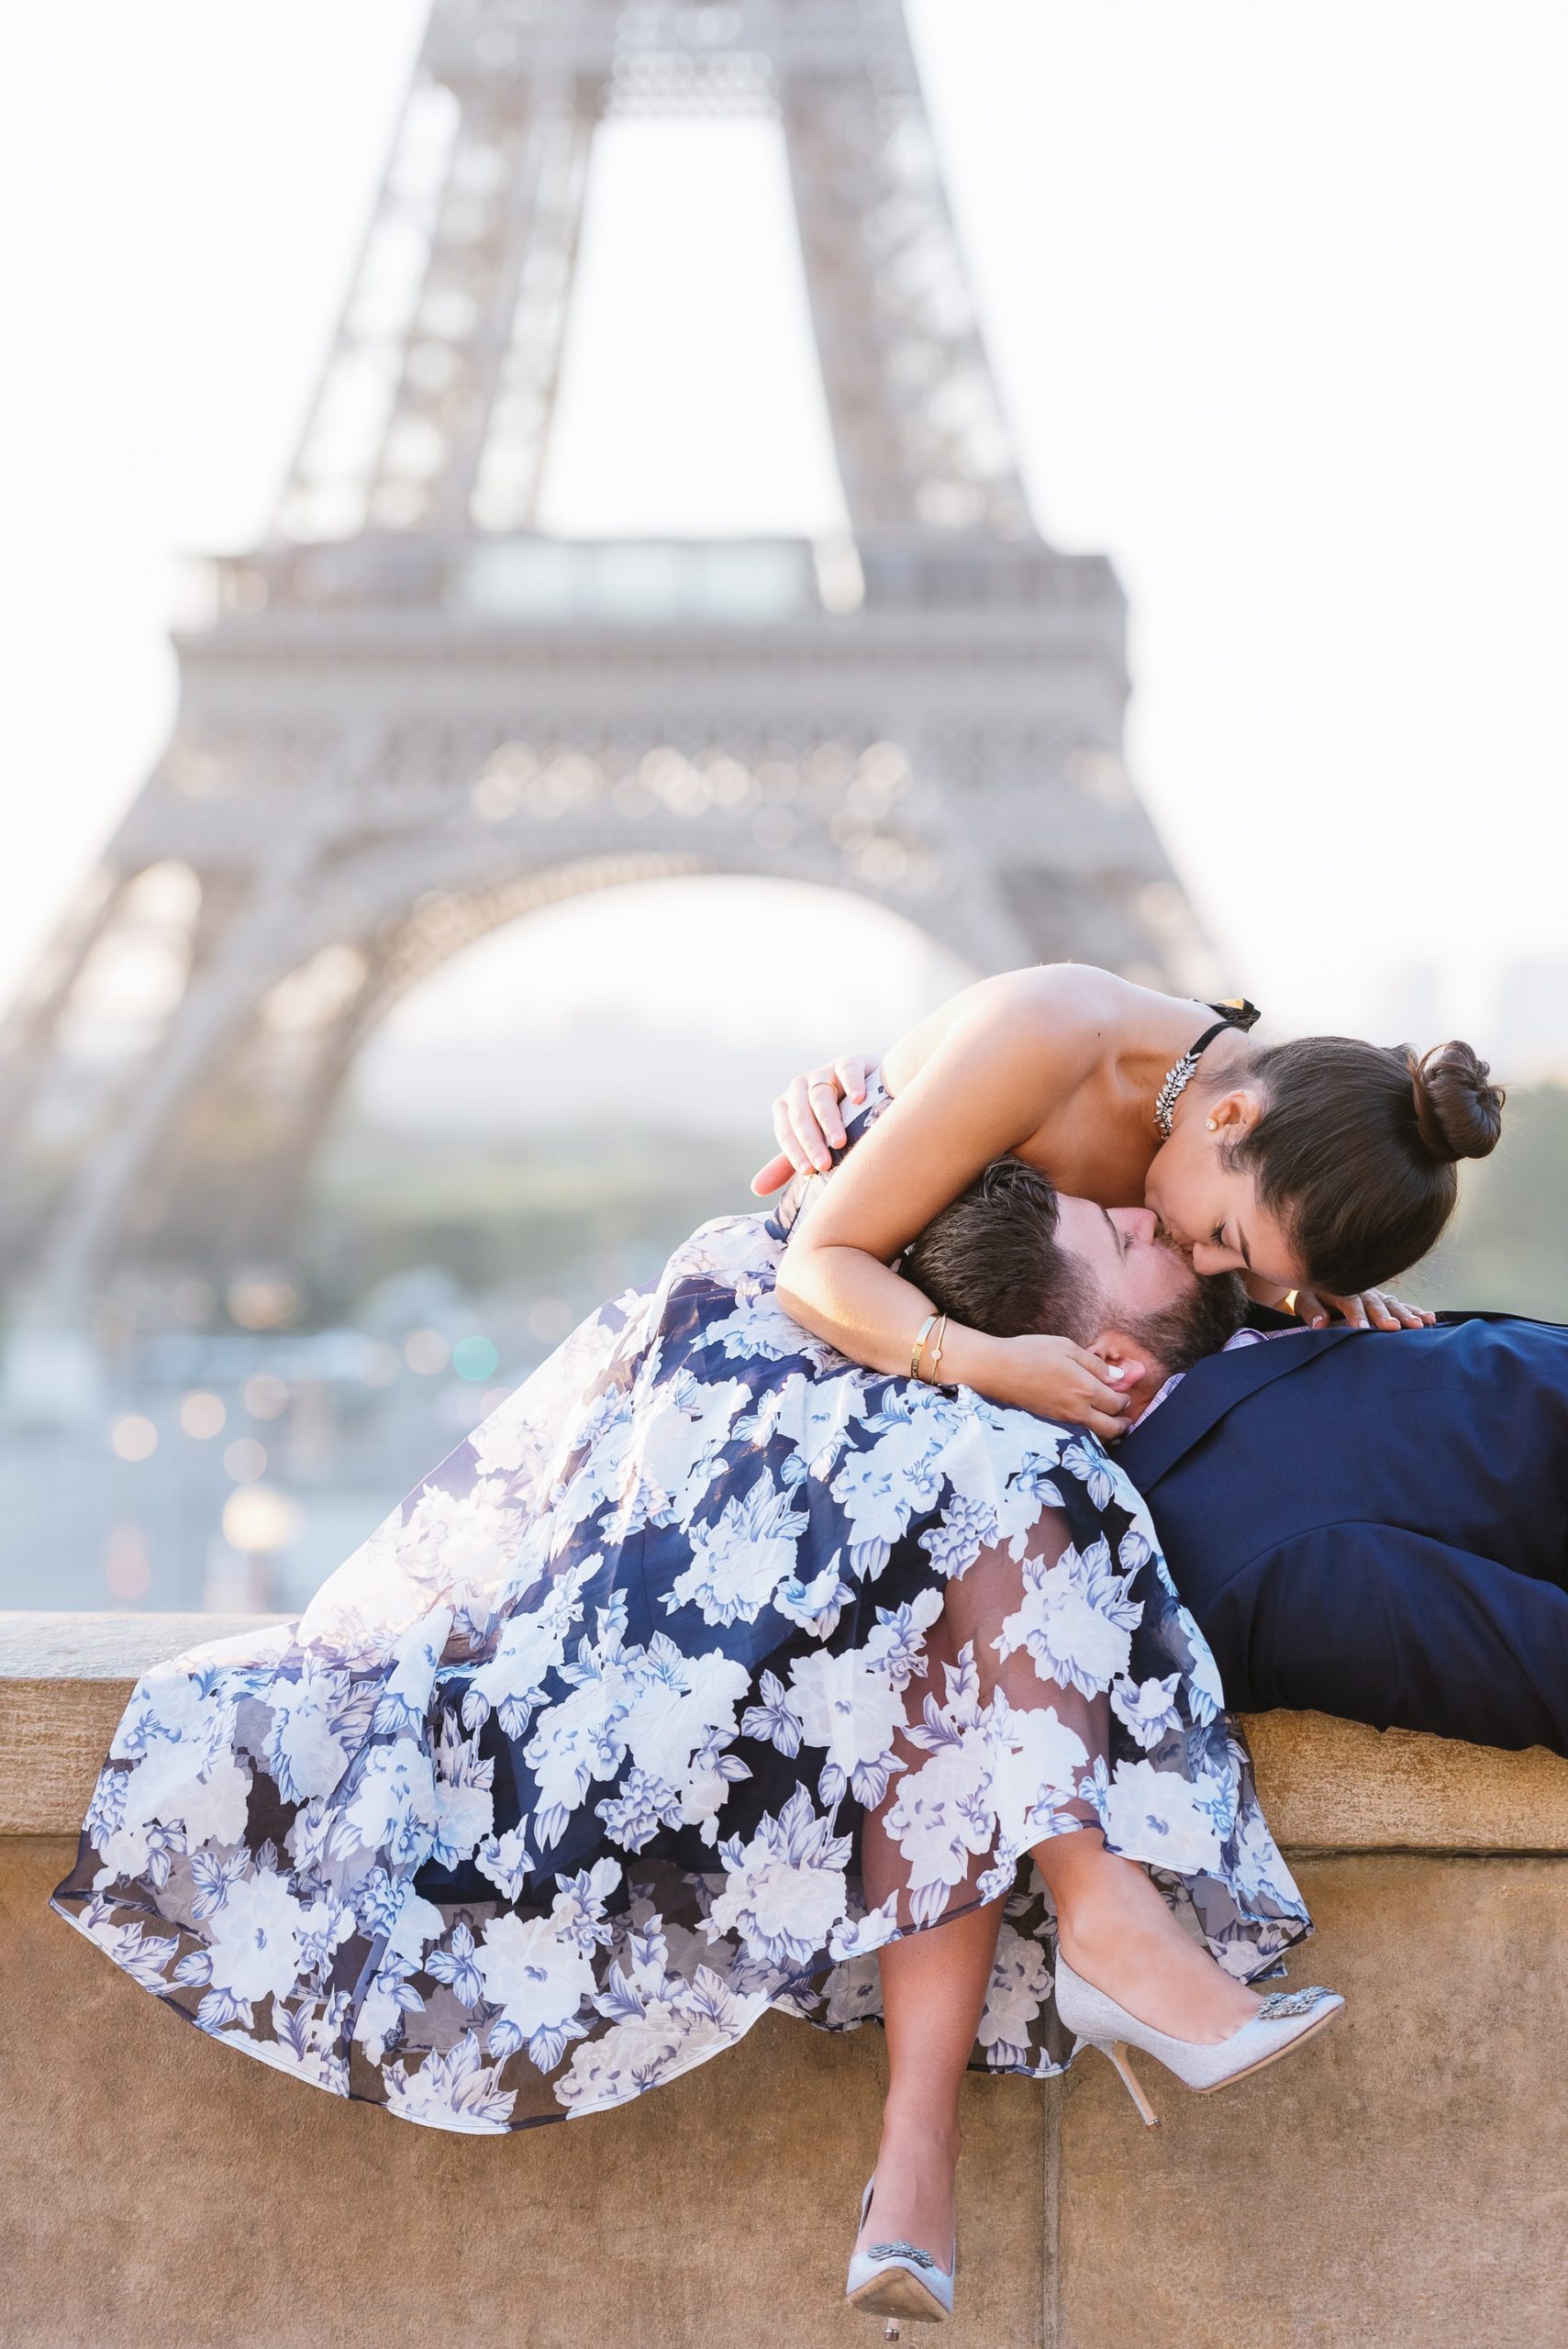 Romance at the Eiffel Tower